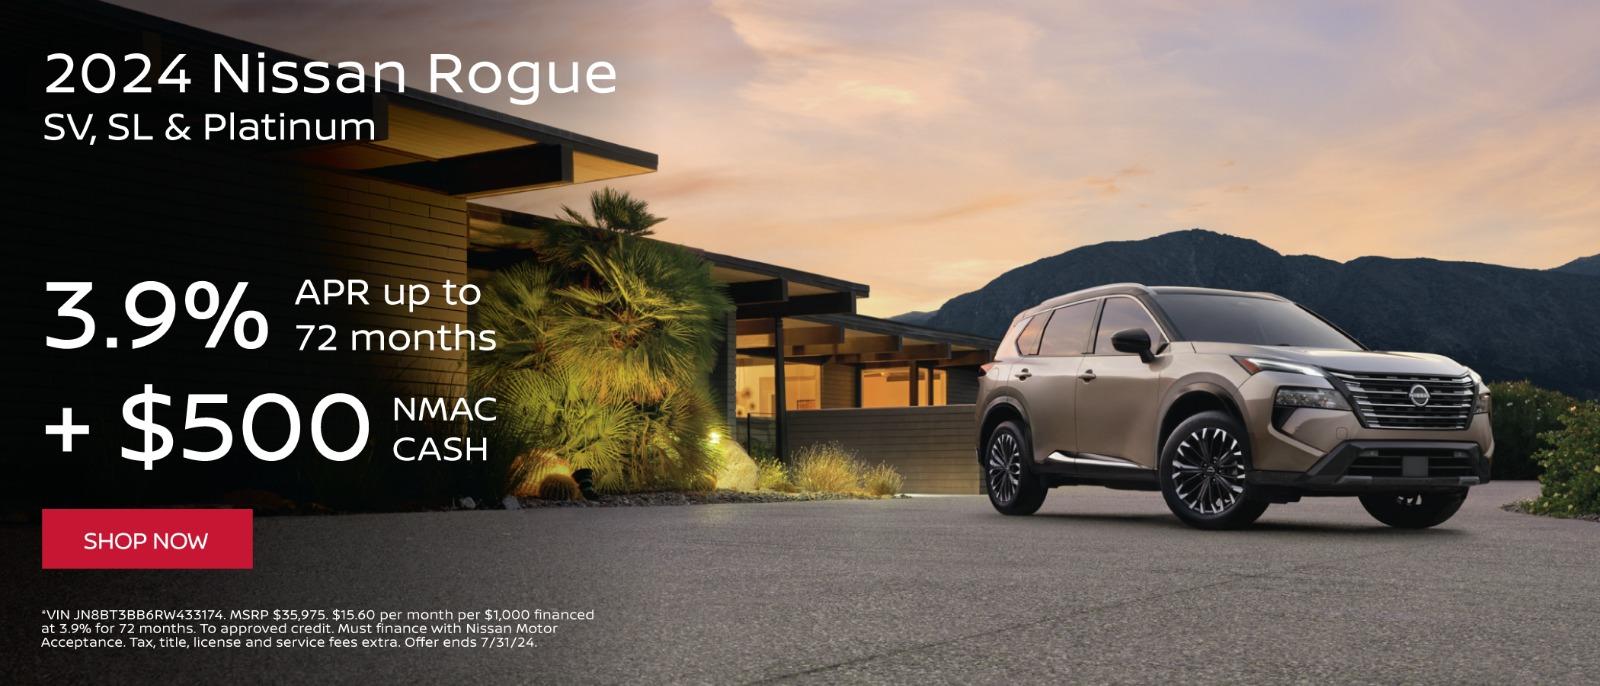 2024 Nissan Rogue 3.9% Apr up to 72 Months